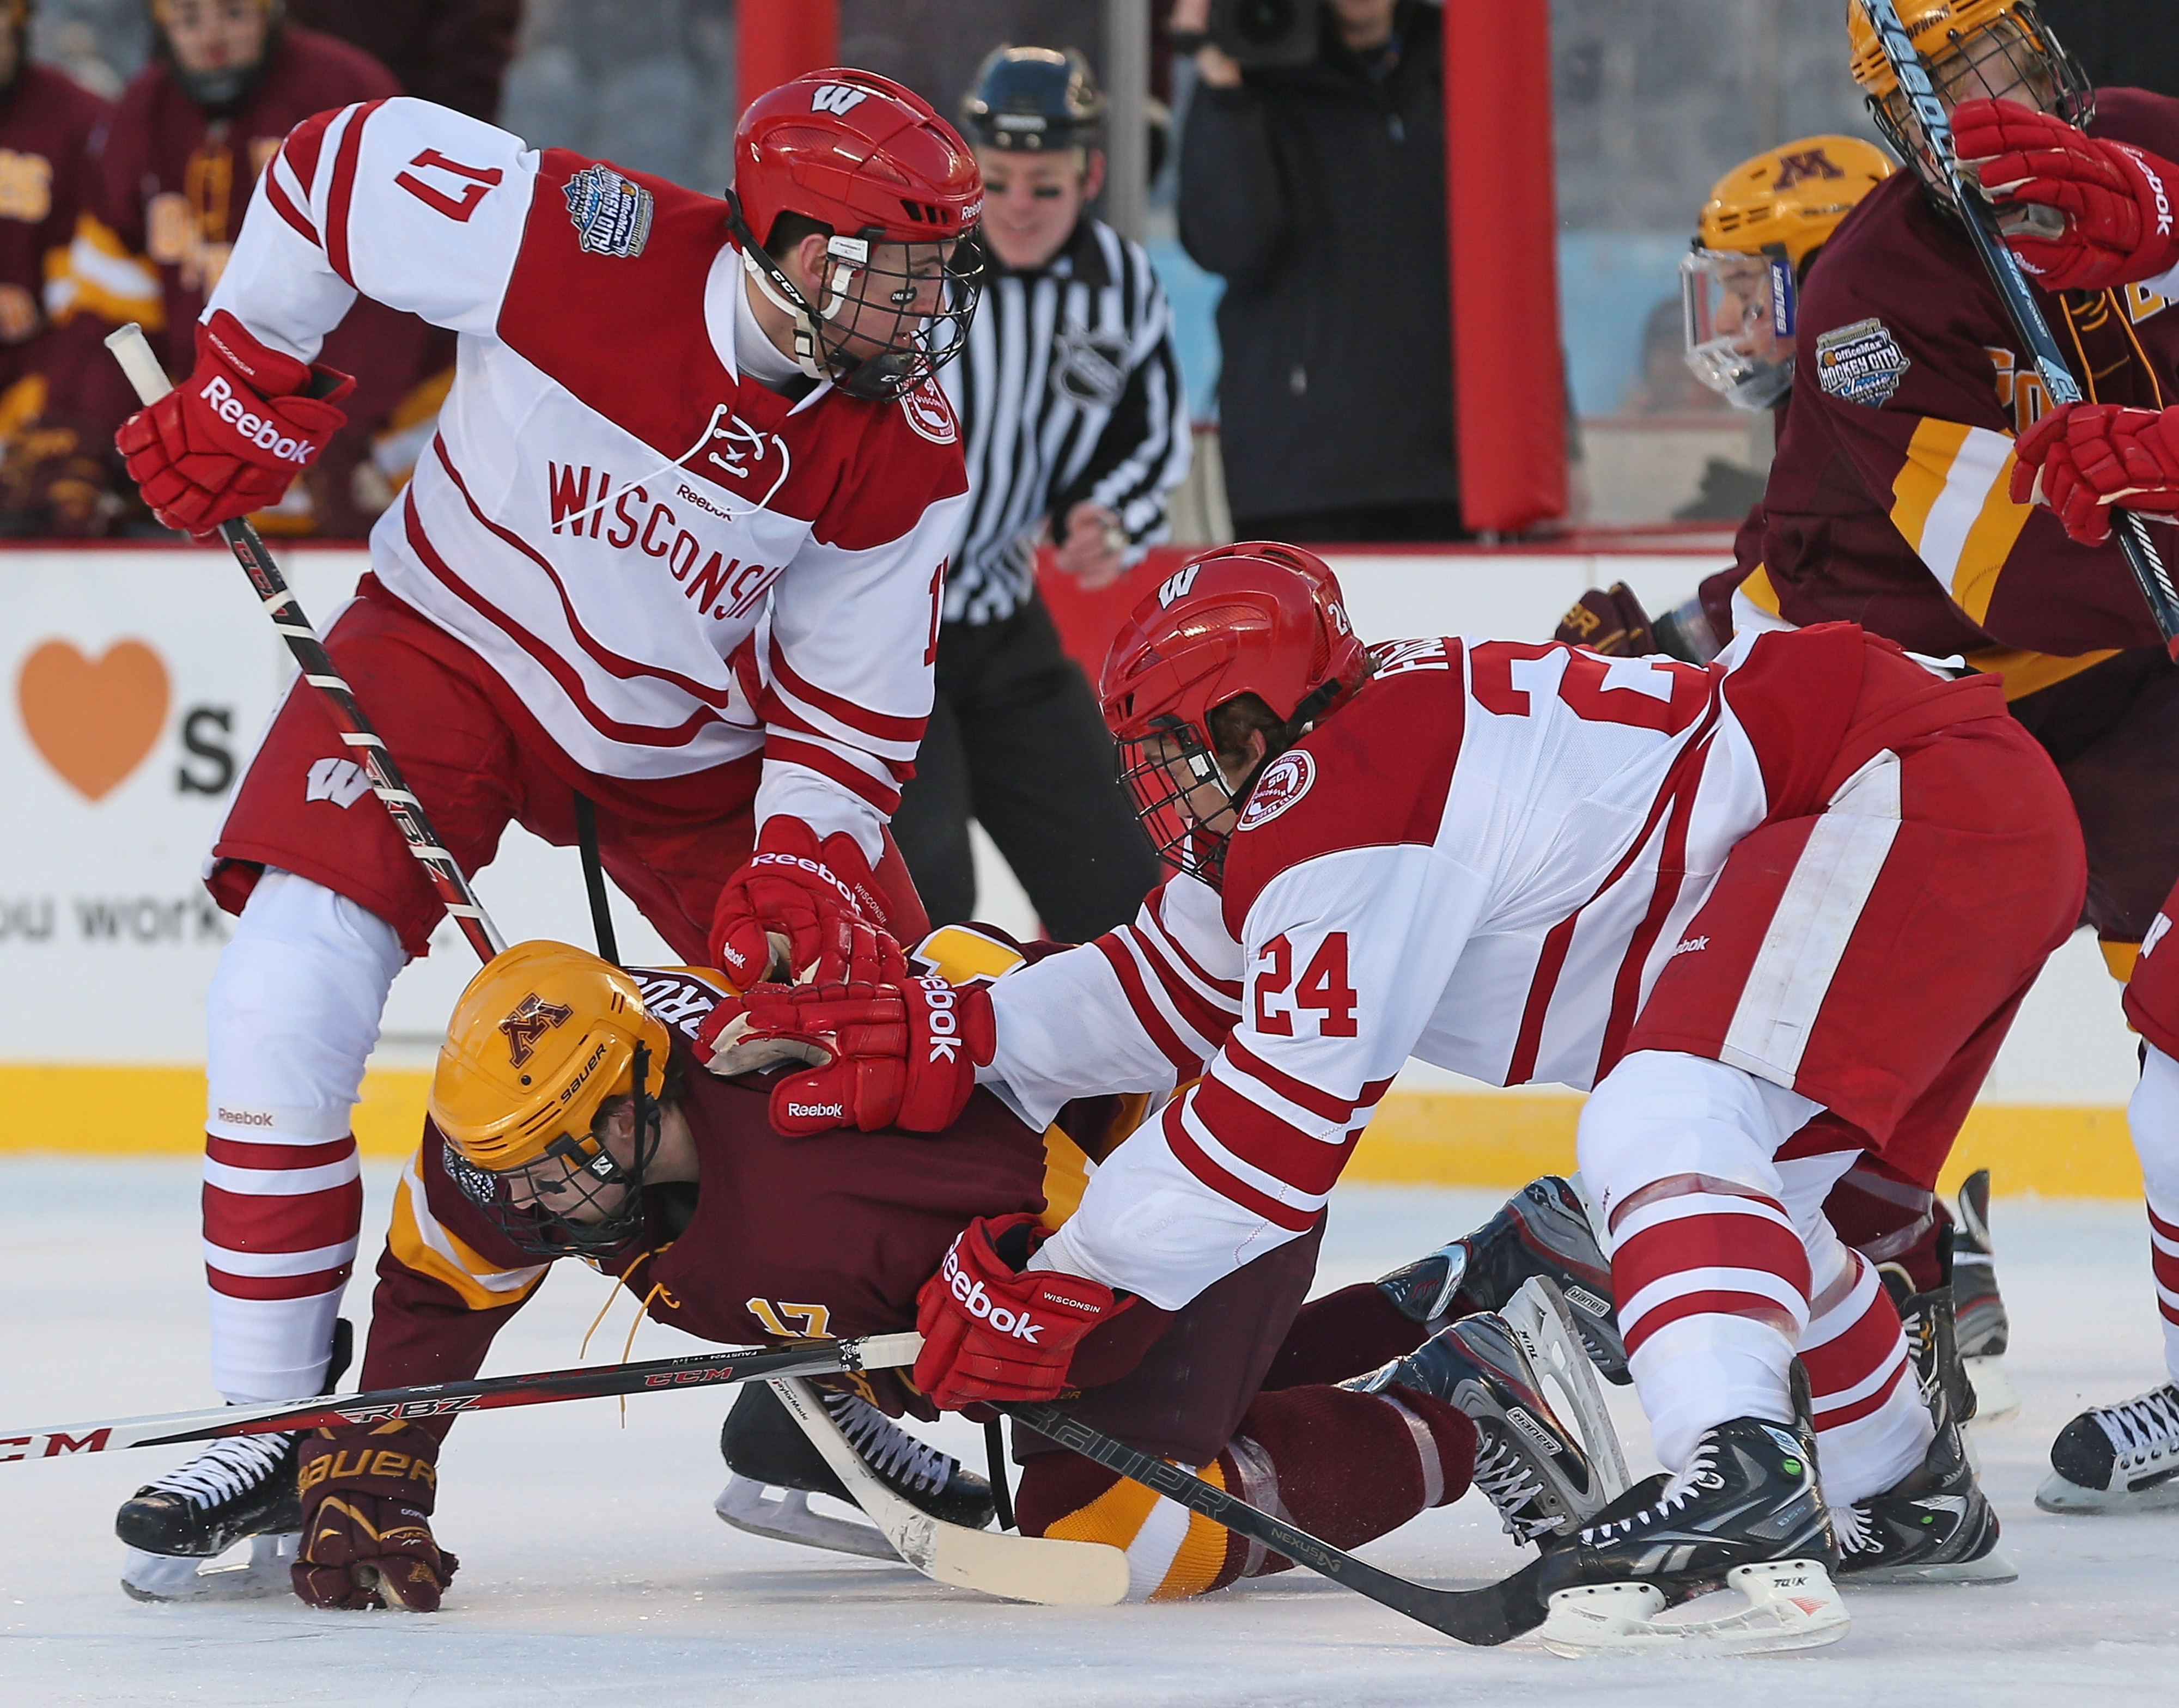 Seth Ambroz #17 of the Minneosta Golden Gophers is shoved to the ice by Joe Faust #24 and Nic Kerdiles #17 of the Wisconsin Badgers during the Hockey City Classic at Soldier Field on February 17, 2013 in Chicago, Illinois.